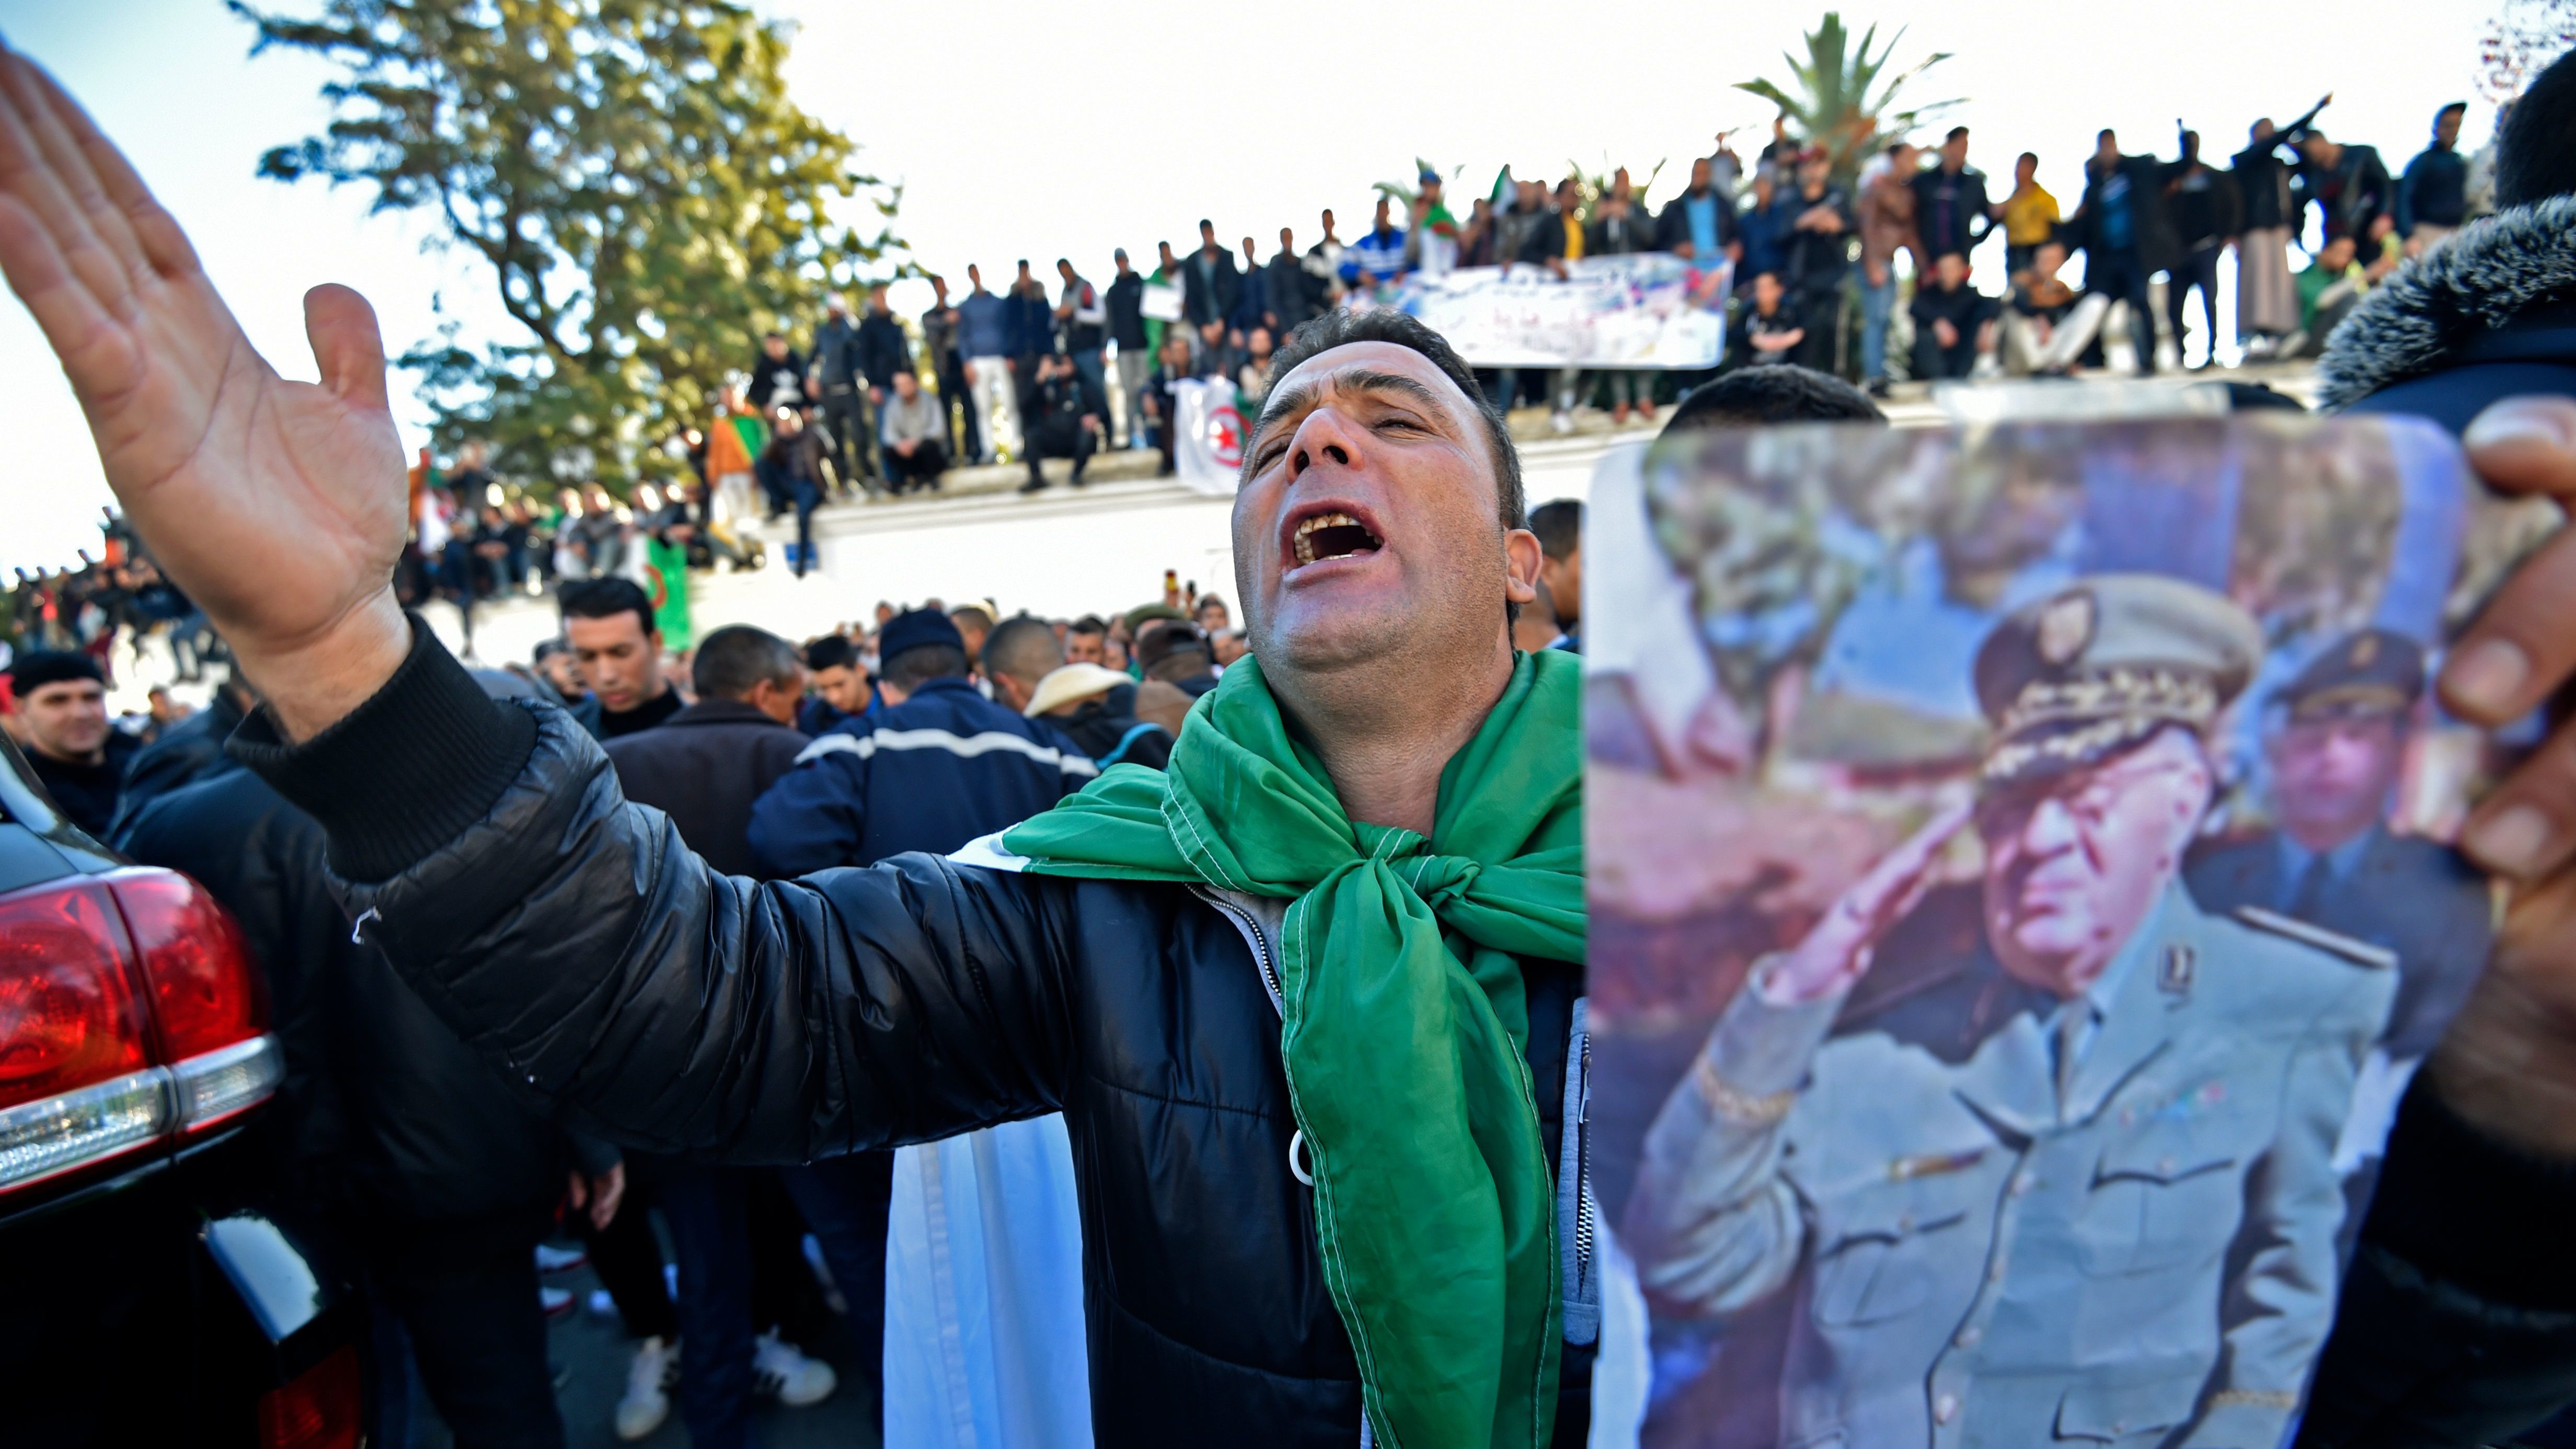 Thousands Turn Out to Honor Algeria’s Dead Military Leader